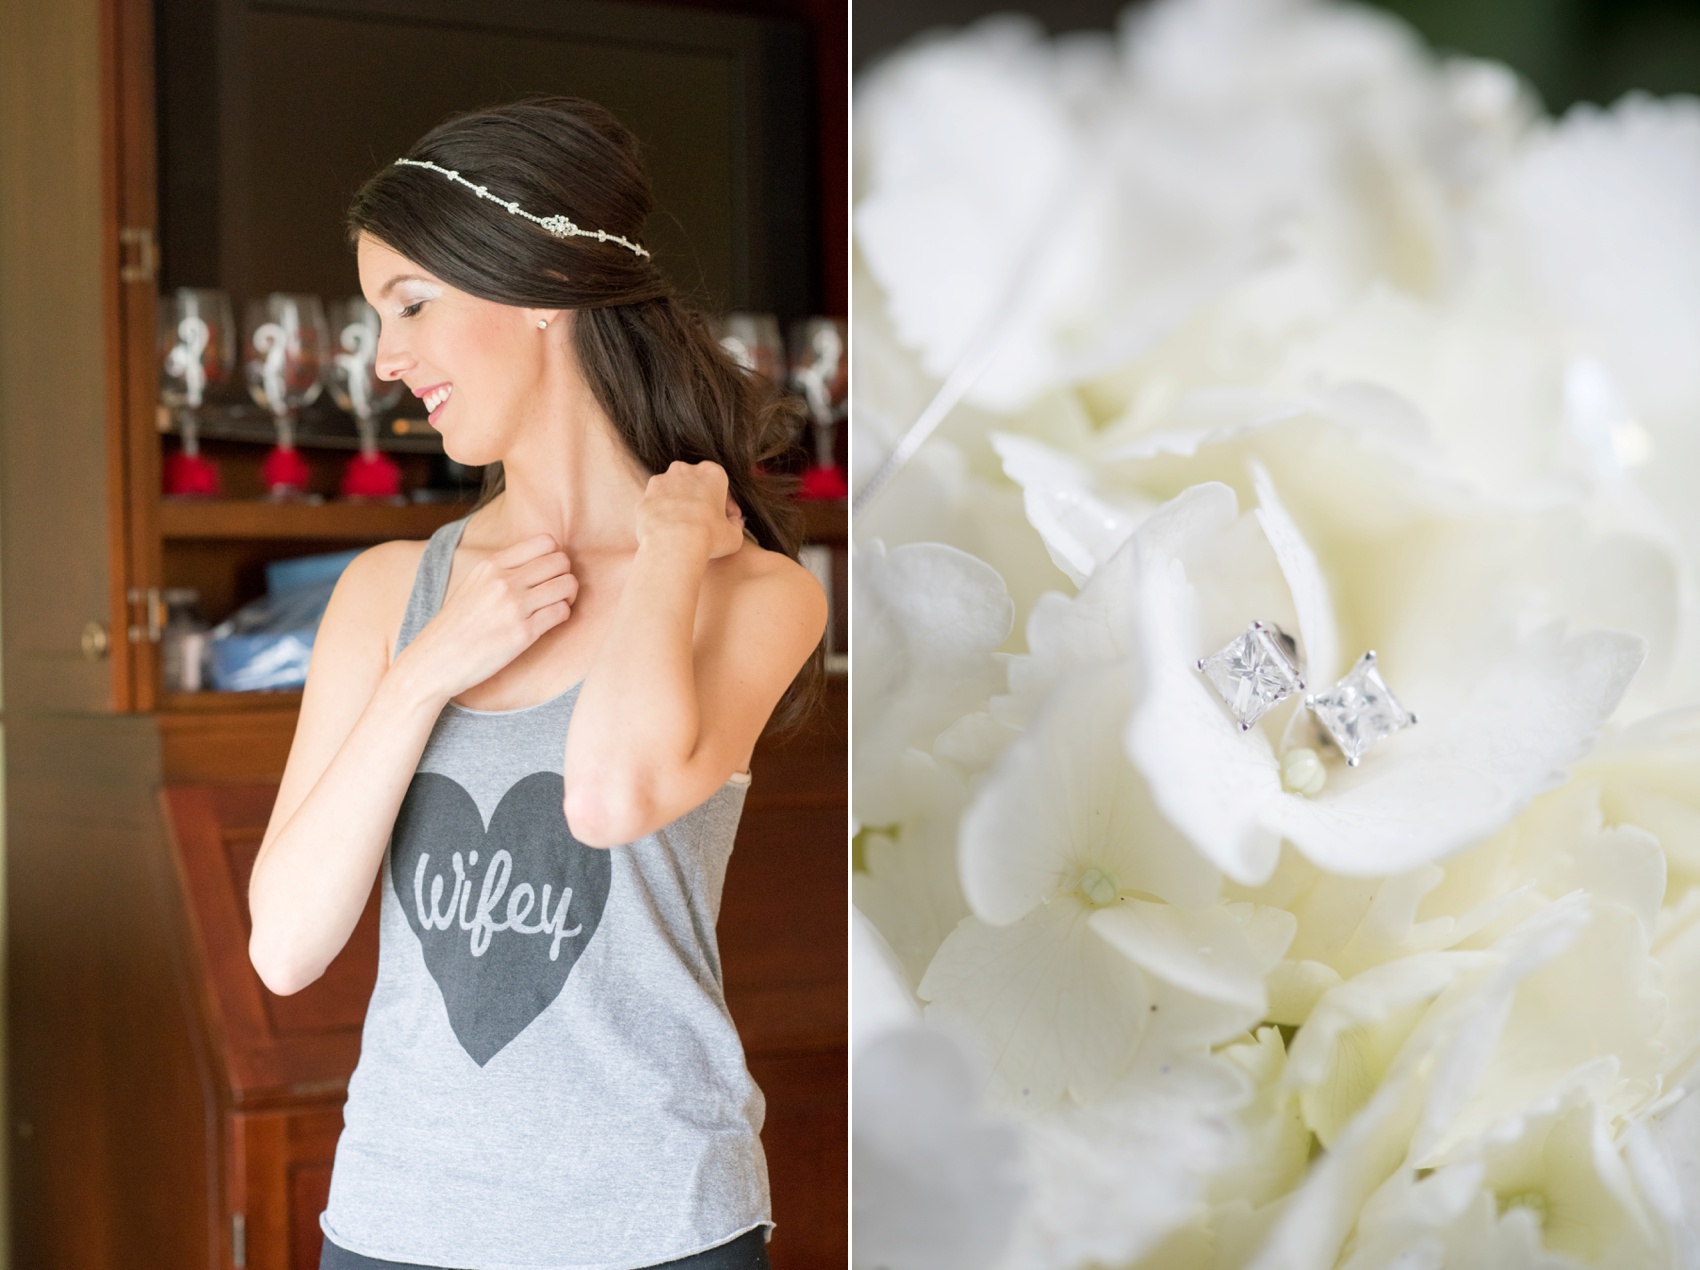 Omni Bedford Springs Resort wedding photos by Mikkel Paige Photography. The bride gets ready in her Wifey tank top with square diamond earrings.